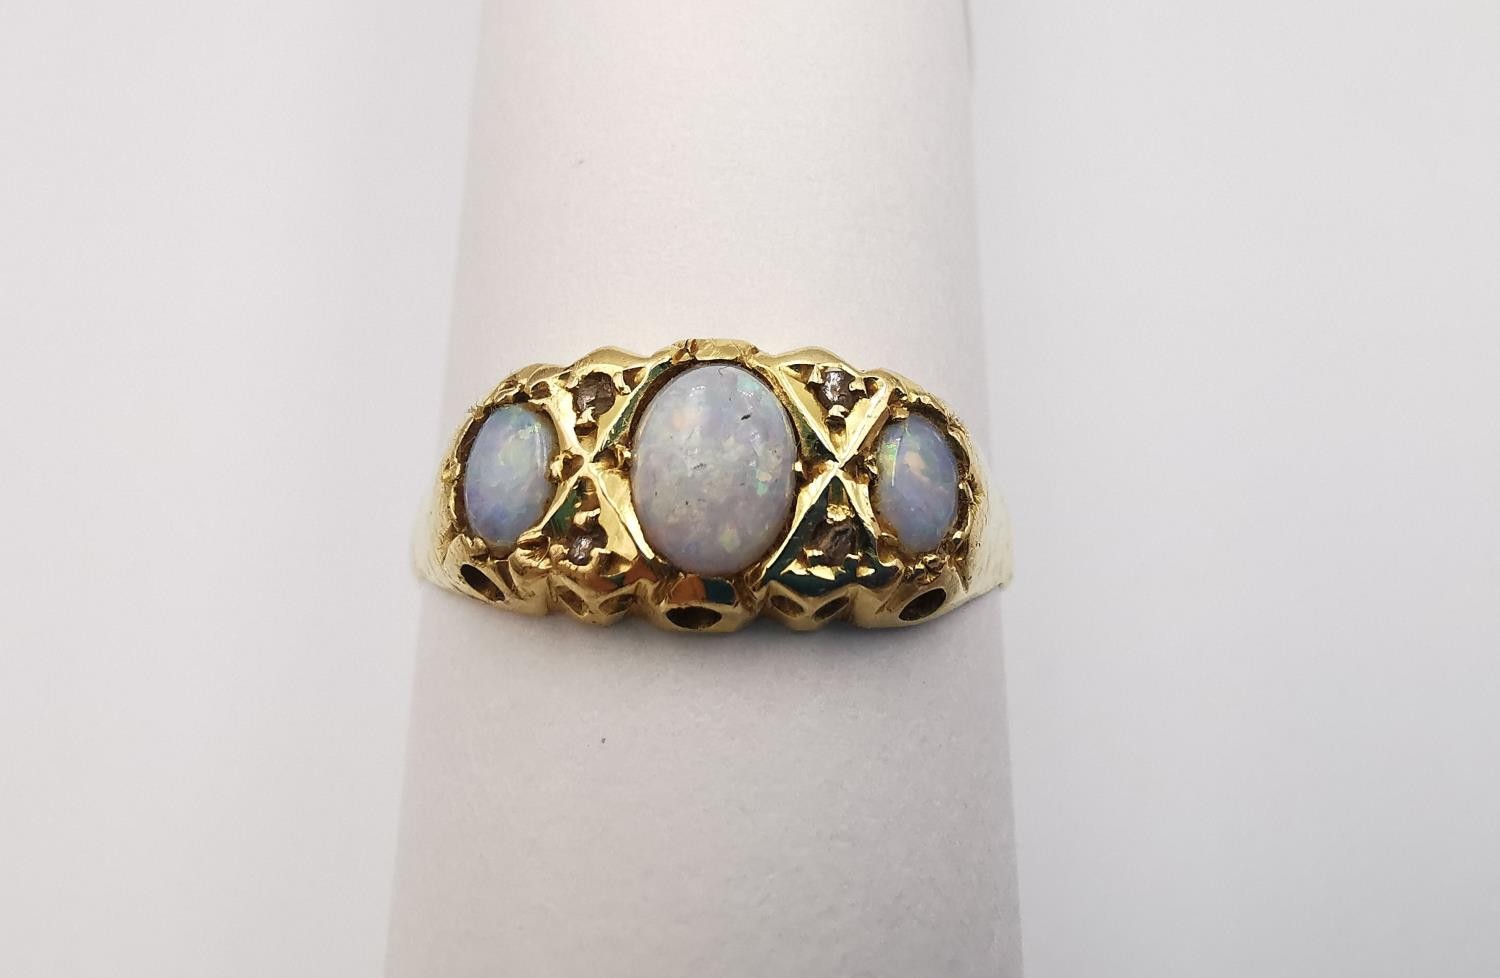 A Victorian 18ct yellow gold three stone opal and diamond ring. Set with three oval opal cabochons